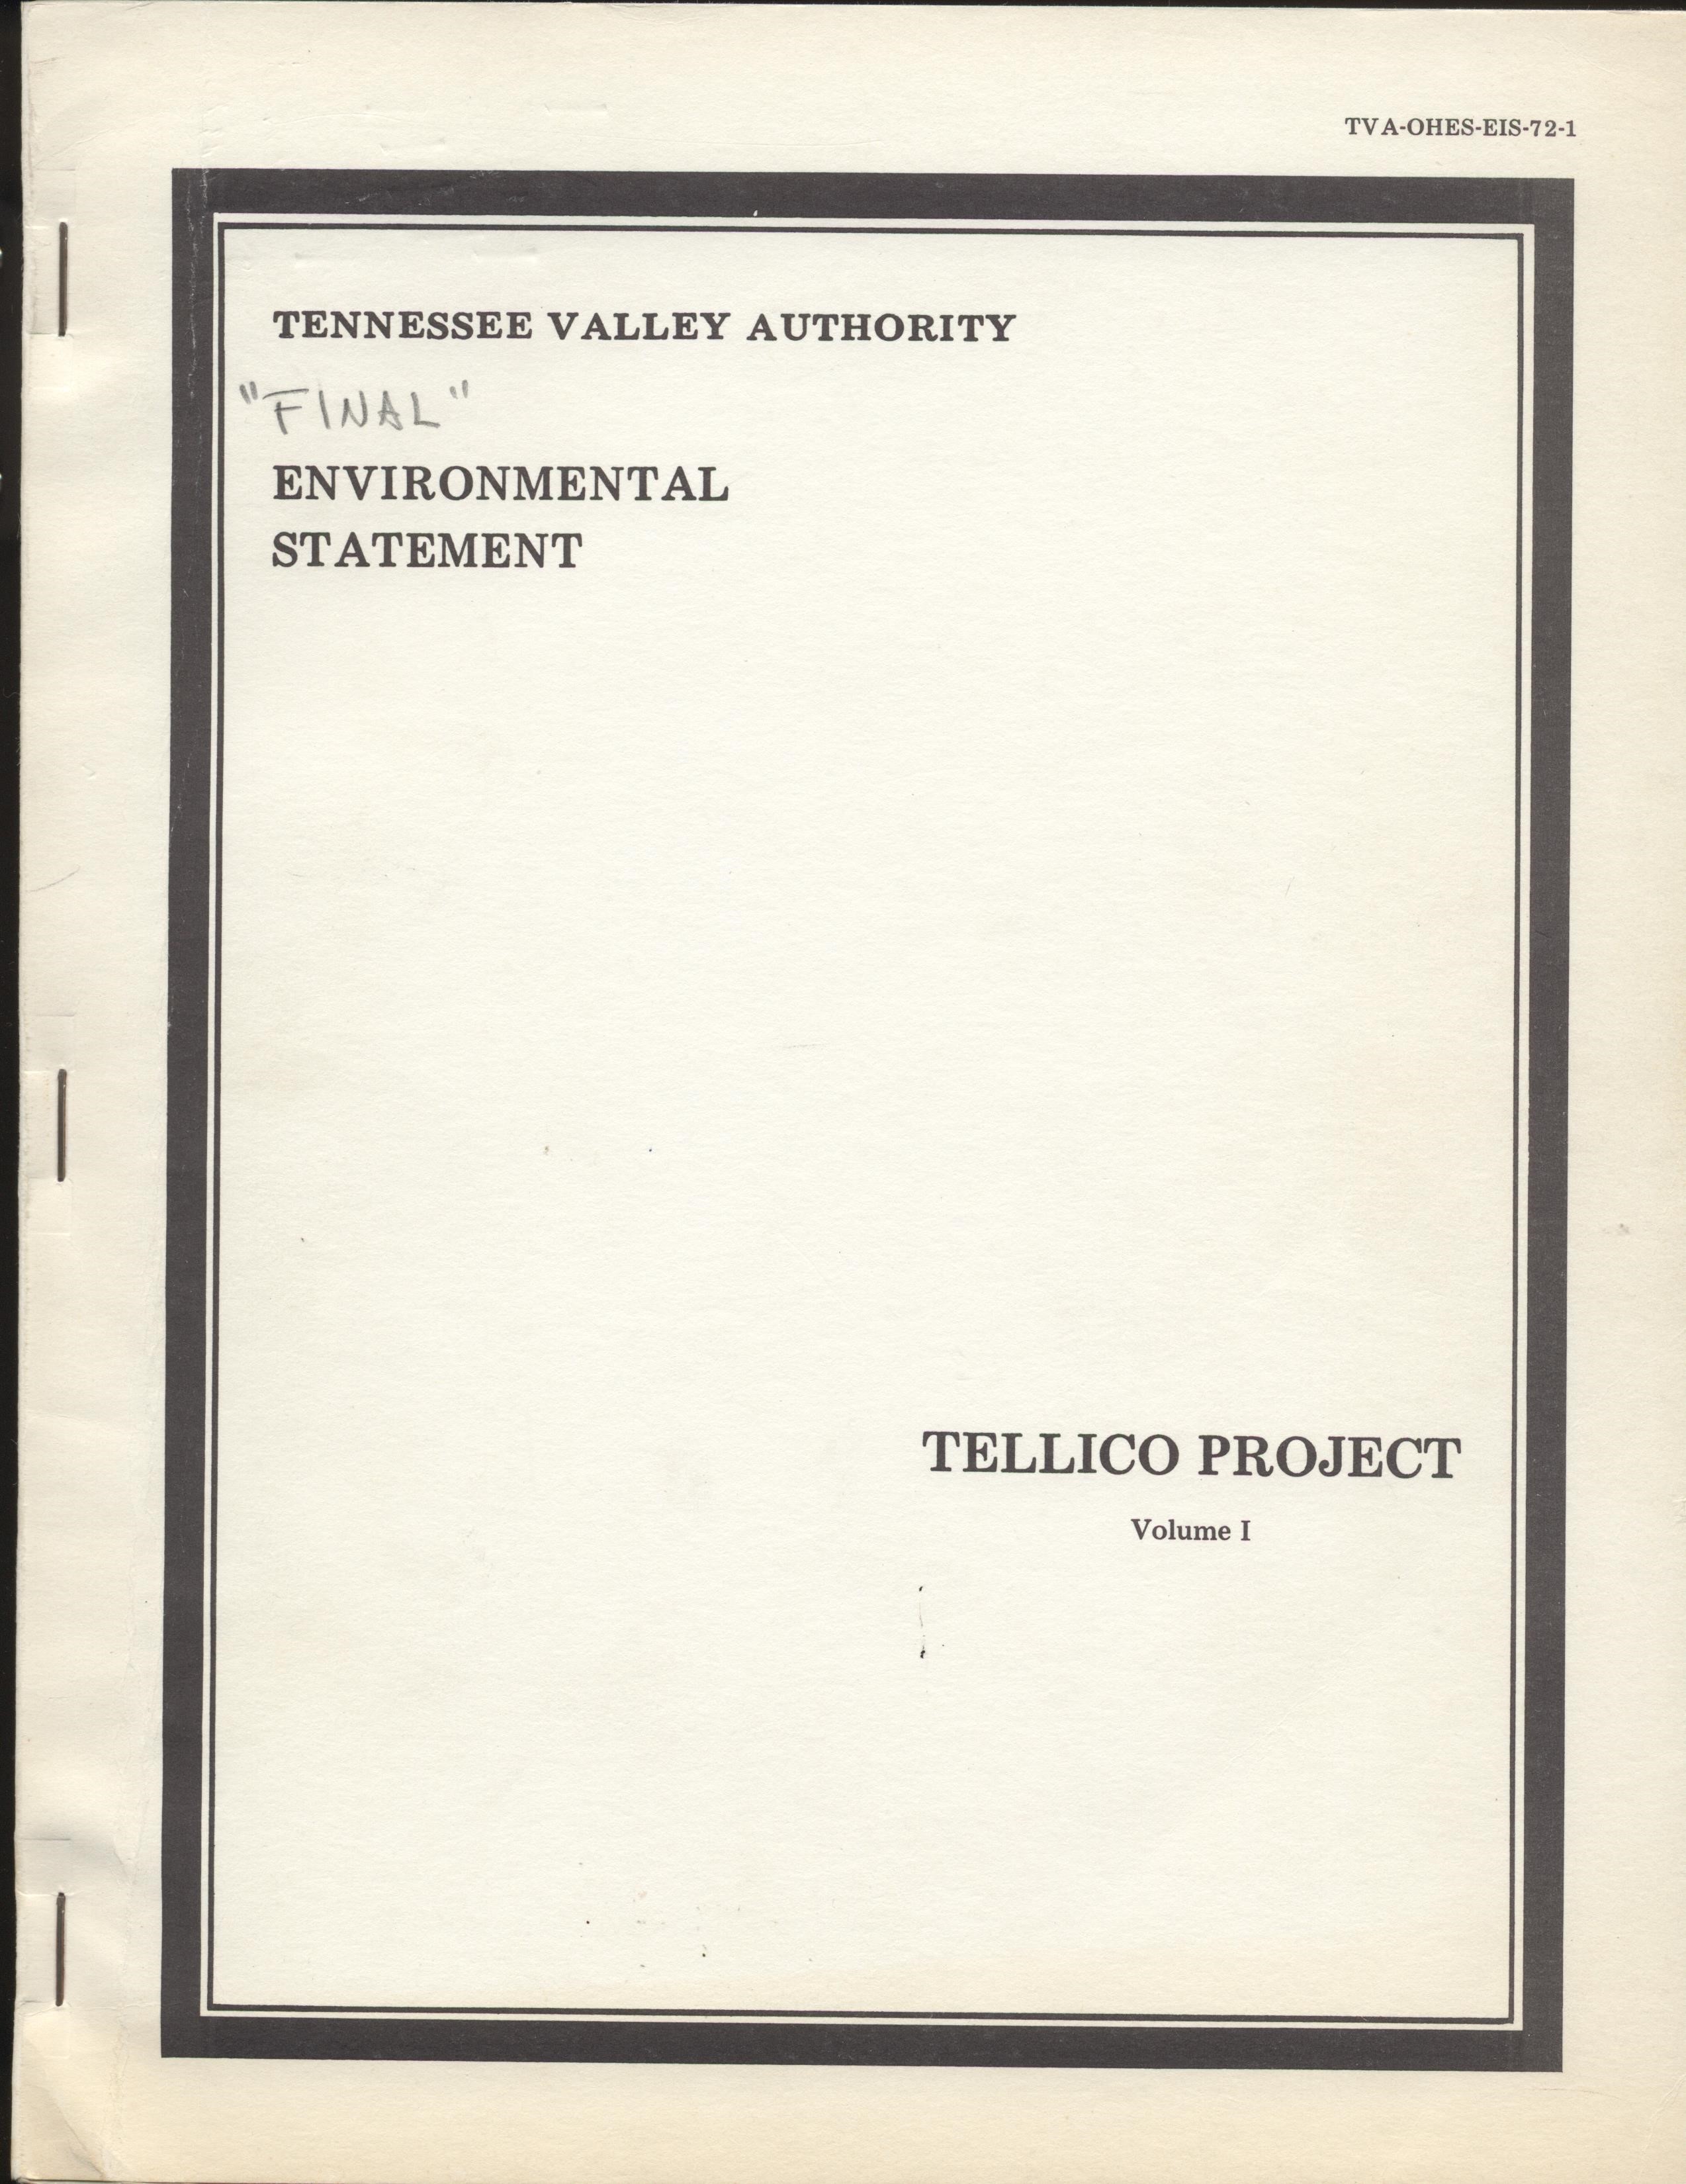 Cover of the Tennessee Valley Authority Environmental Statement on the Tellico Project